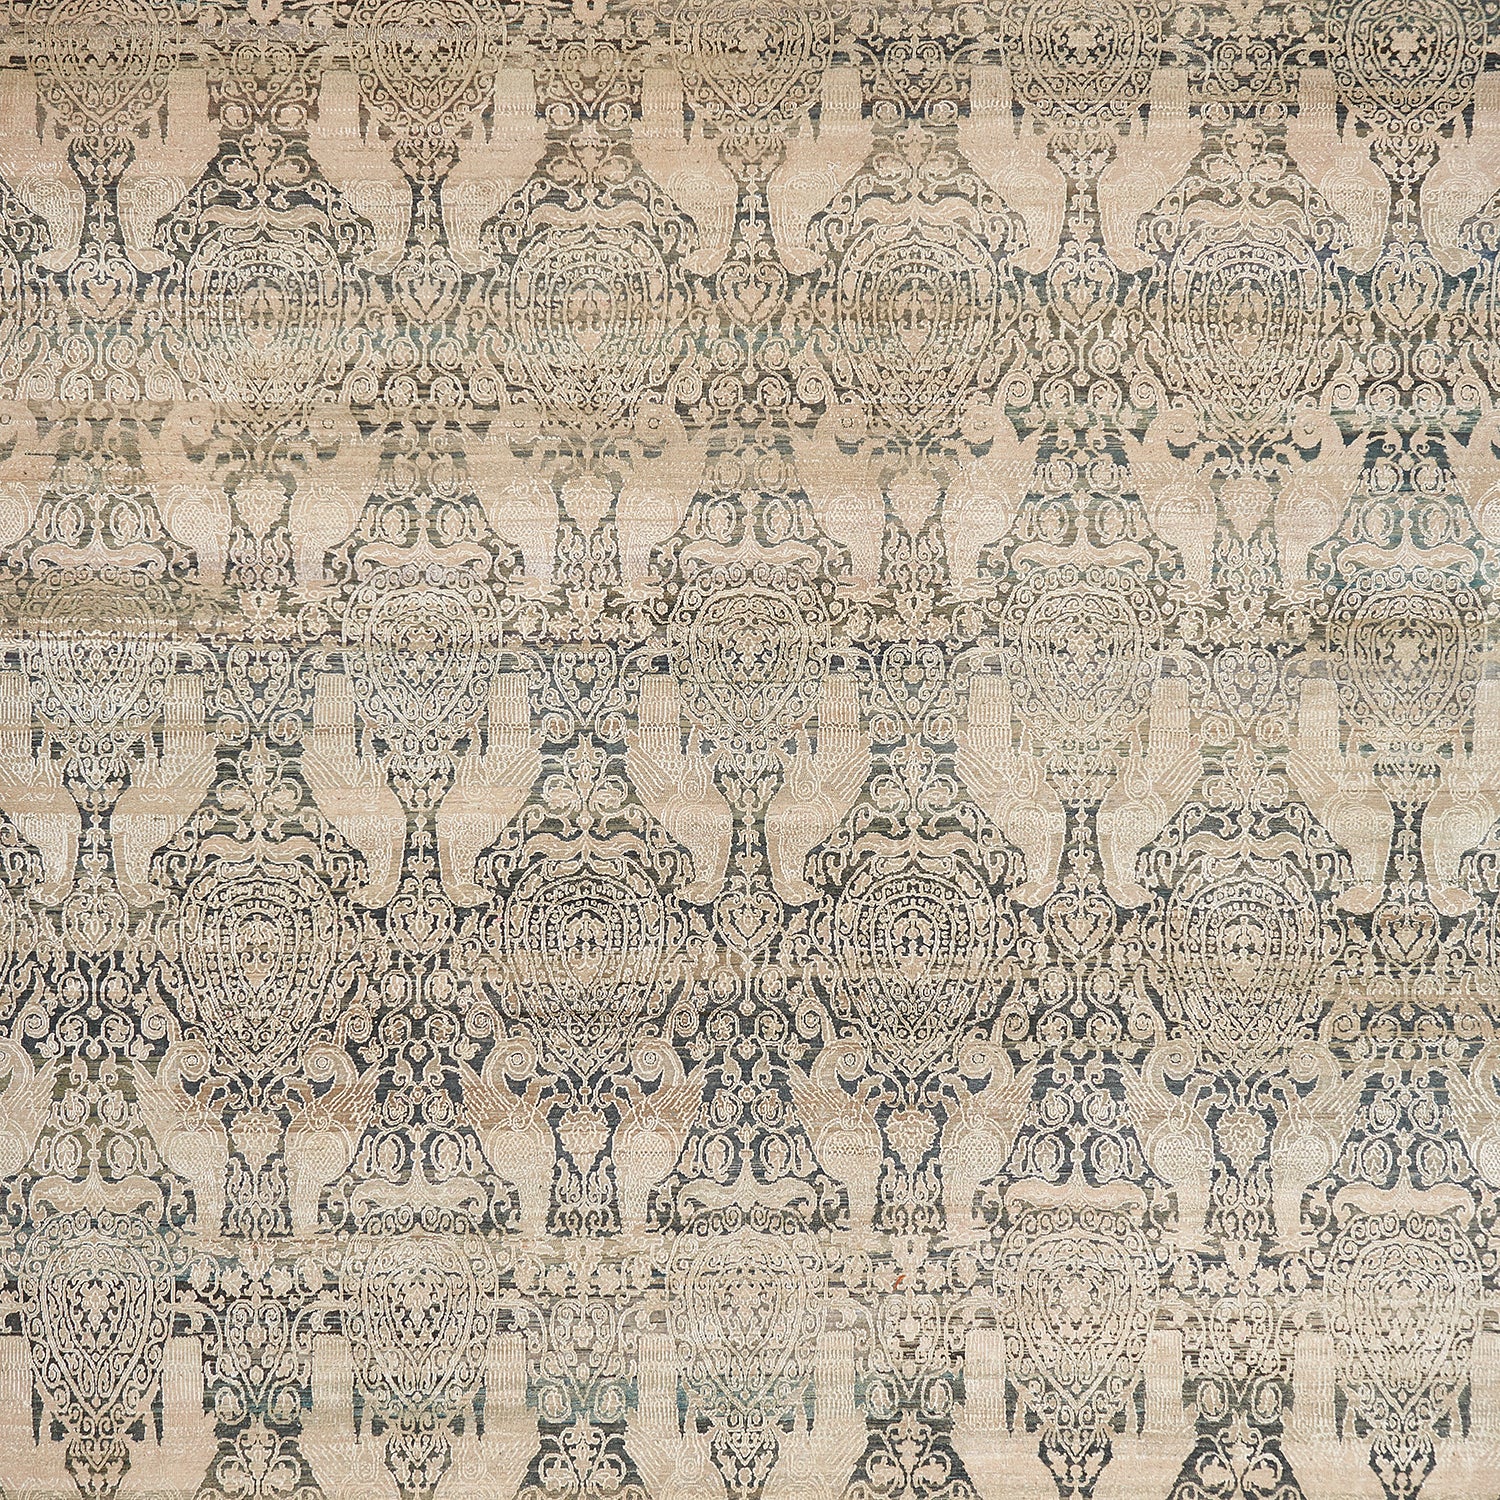 Intricate symmetrical patterned fabric with classical motifs in neutral tones.